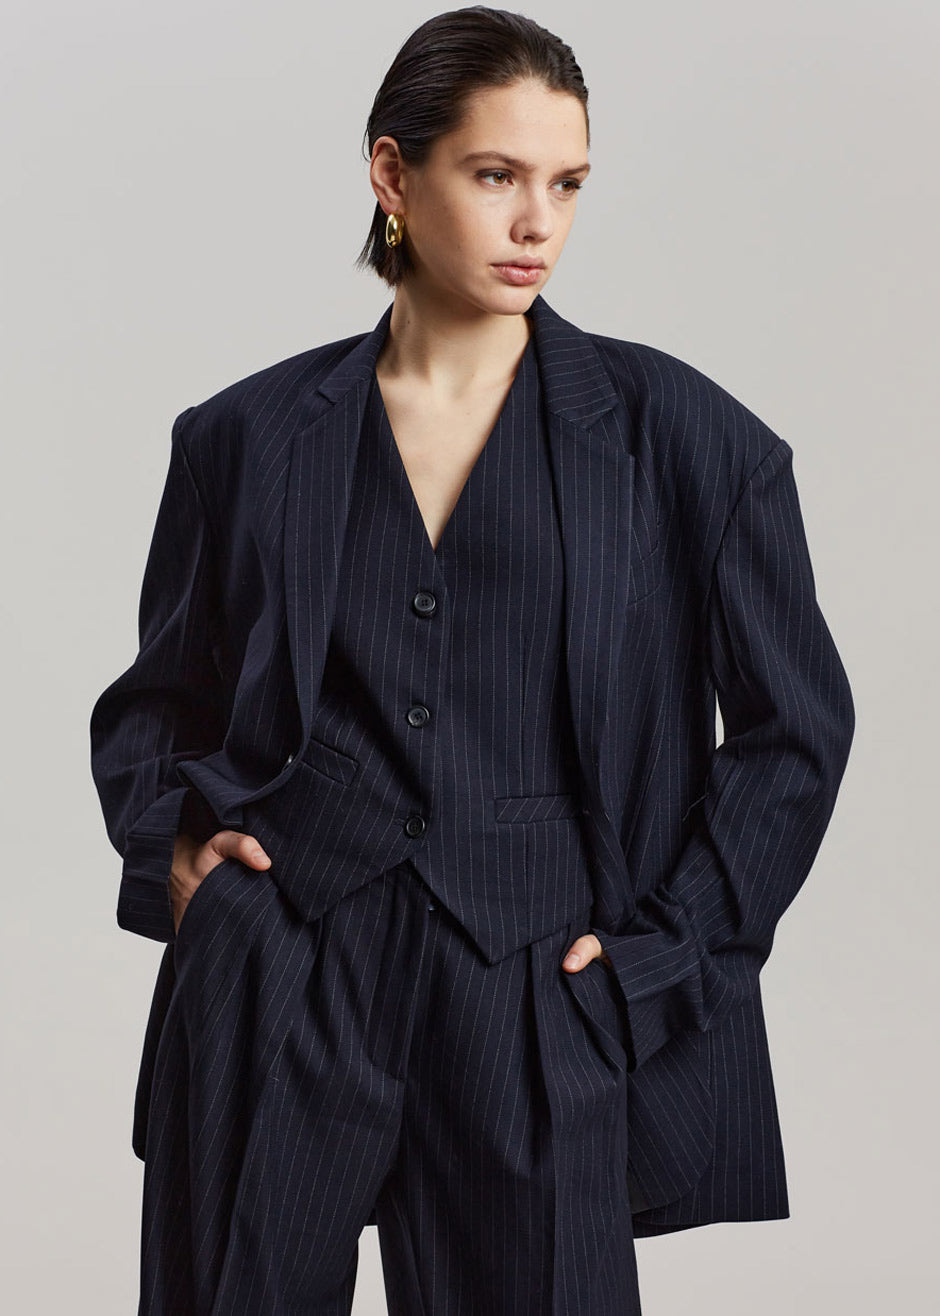 Tansy Tailored Vest - Navy Pinstripe - 6